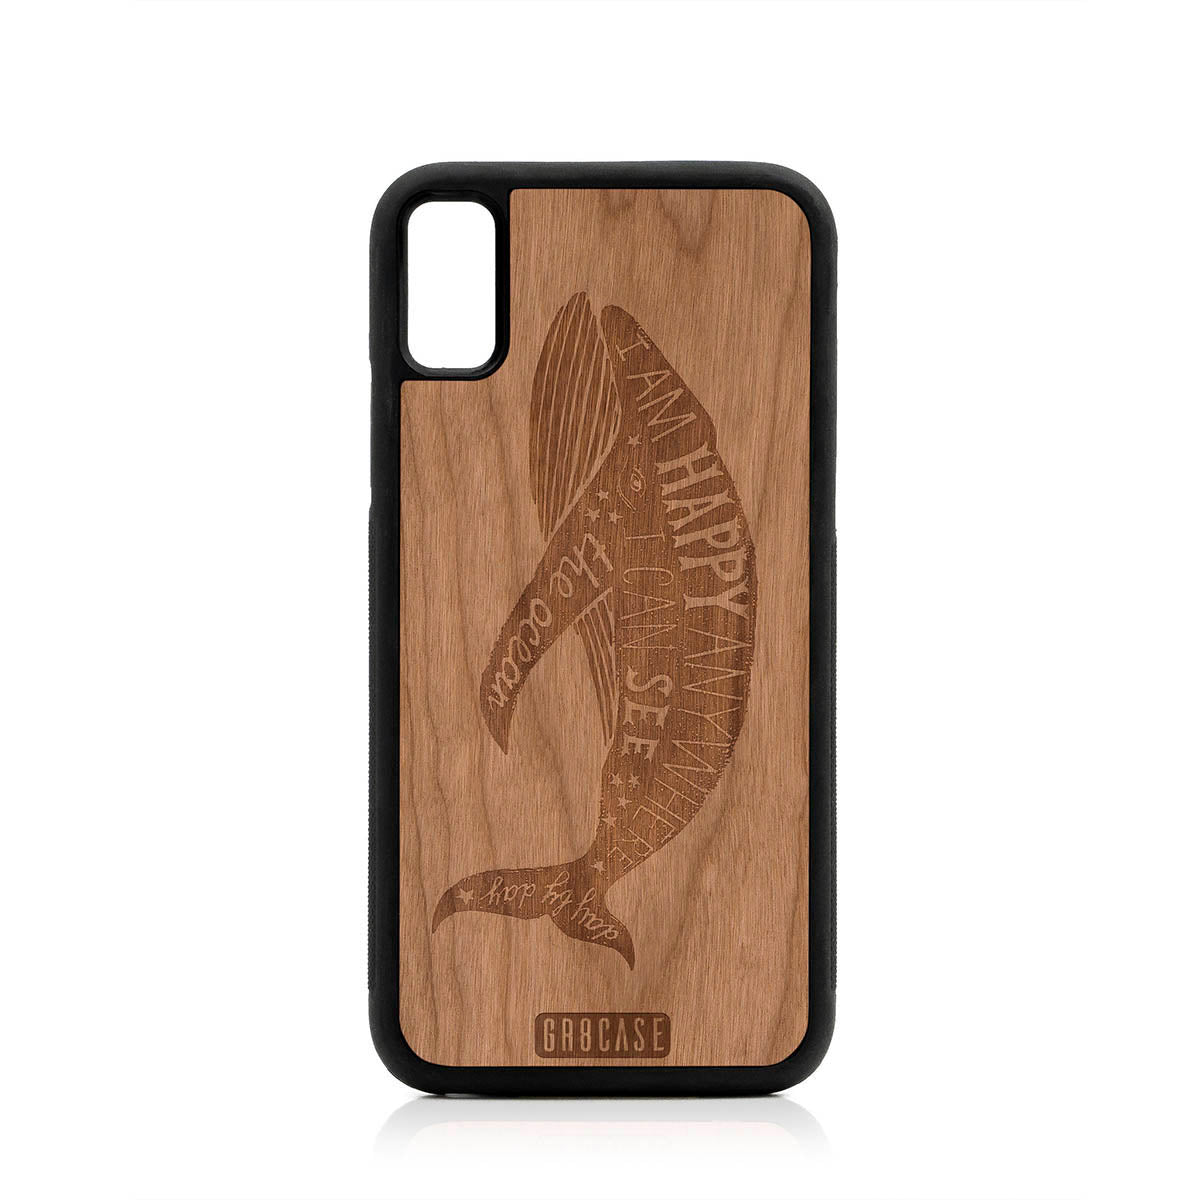 I'm Happy Anywhere I Can See The Ocean (Whale) Design Wood Case For iPhone X/XS